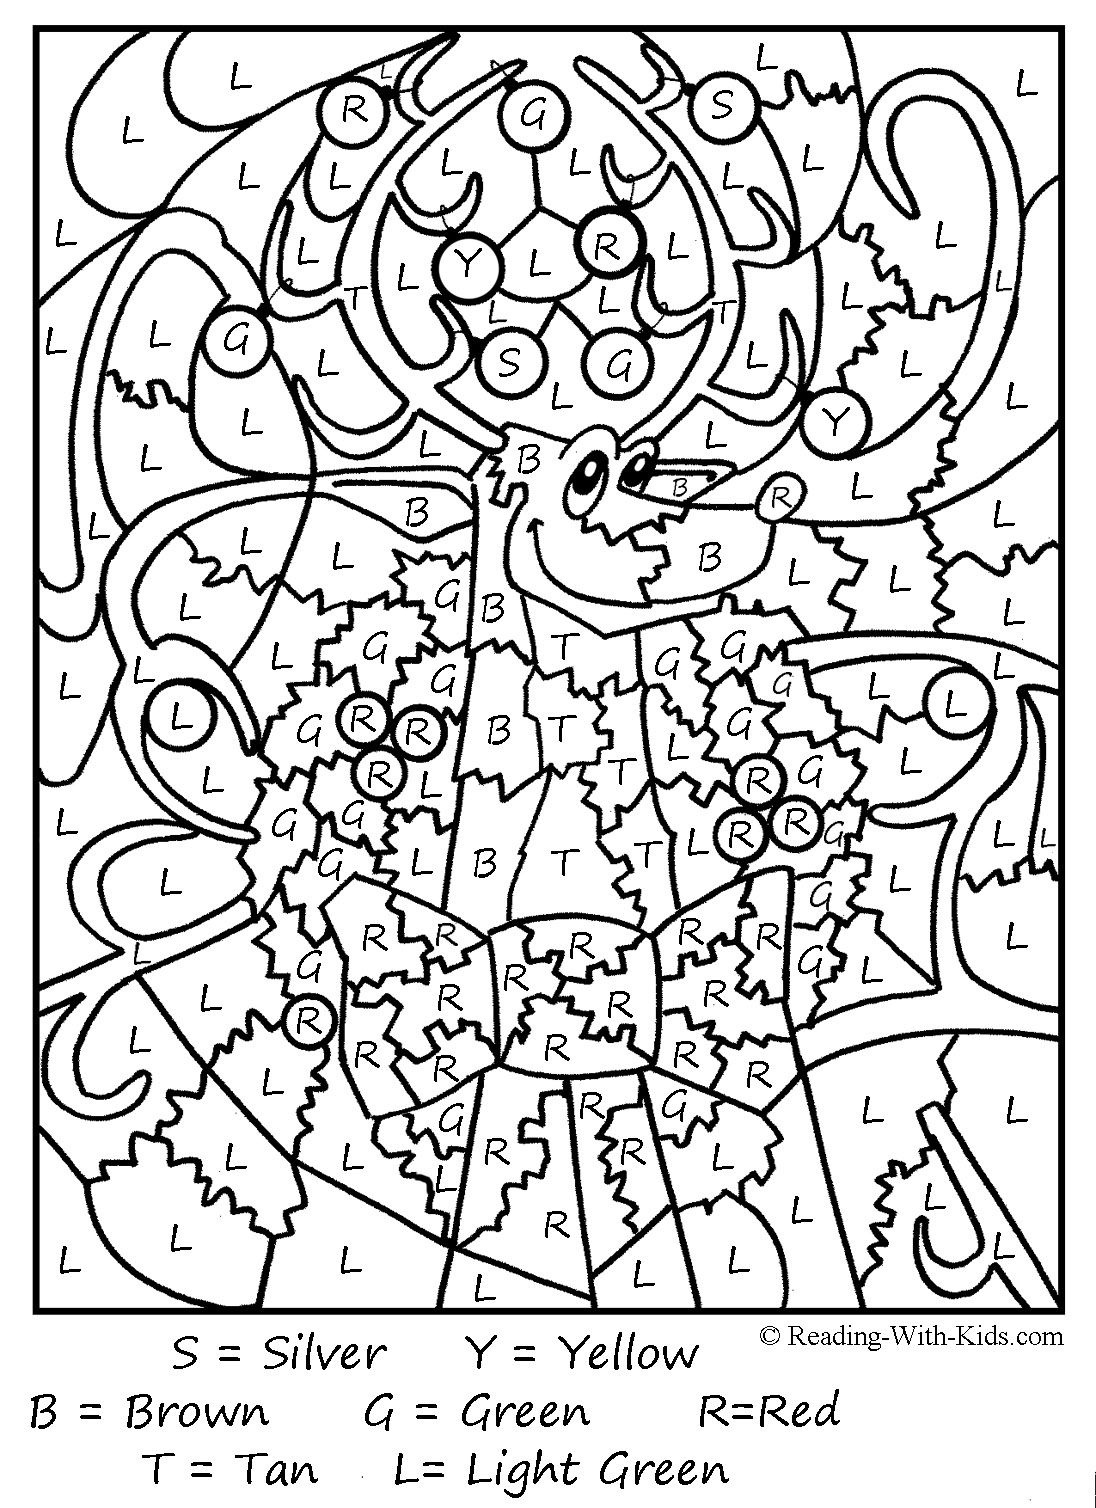 Christmas Colornumber Coloring Pages Printable | Coloring Pages - Free Printable Christmas Color By Number Coloring Pages